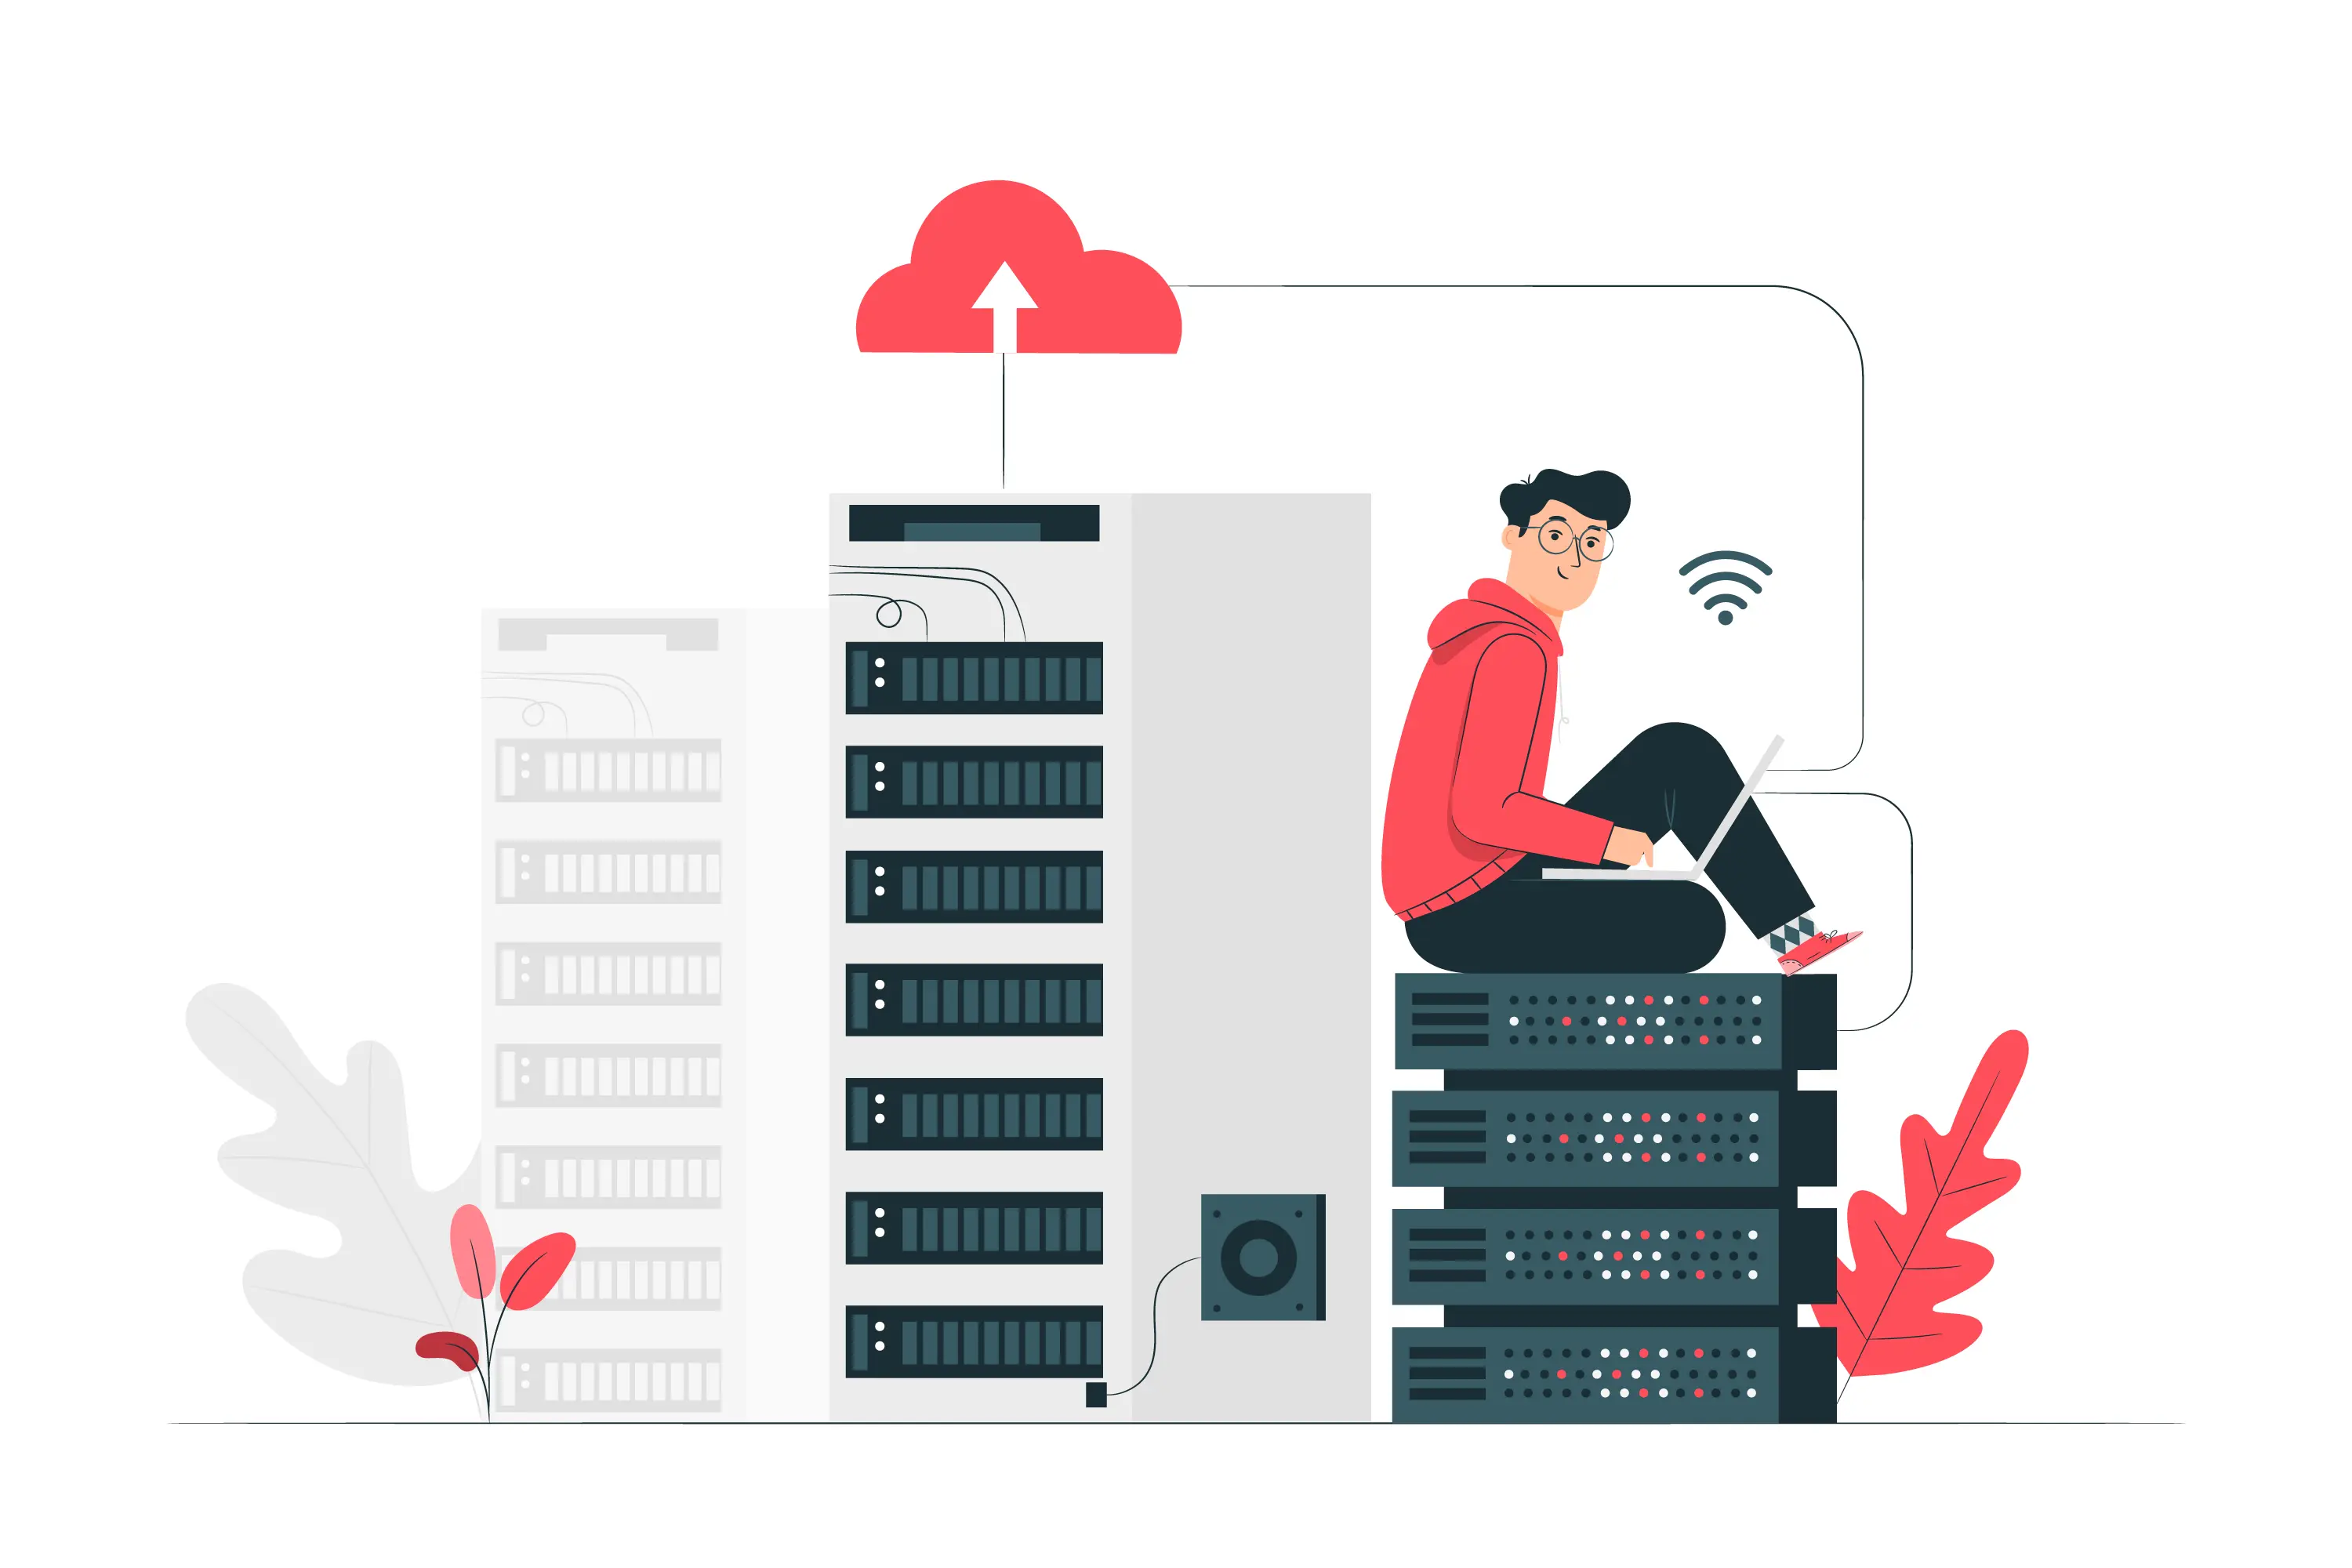 Optimizing databases is vital for data-driven businesses. Sluggish databases lead to operational delays and dissatisfied customers.